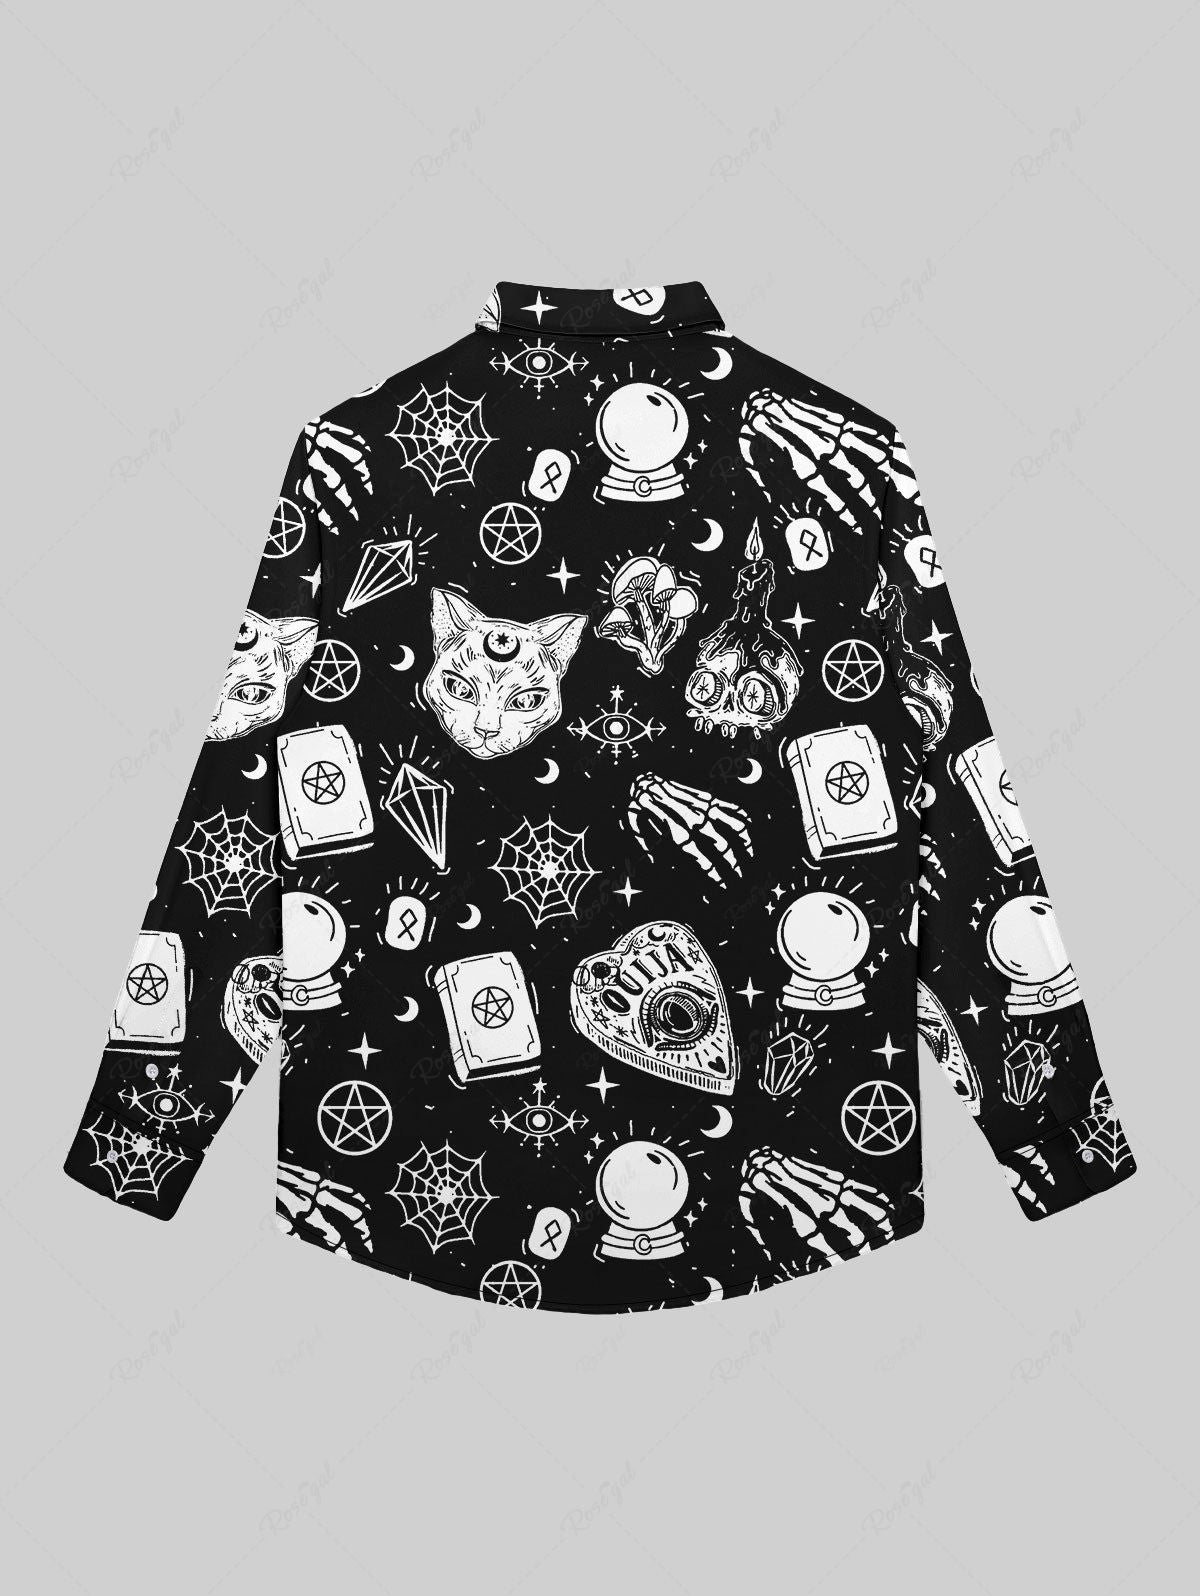 Gothic Galaxy Moon Star Spider Web Skulls Candle Flame Cat Print Button Down Shirt For Men